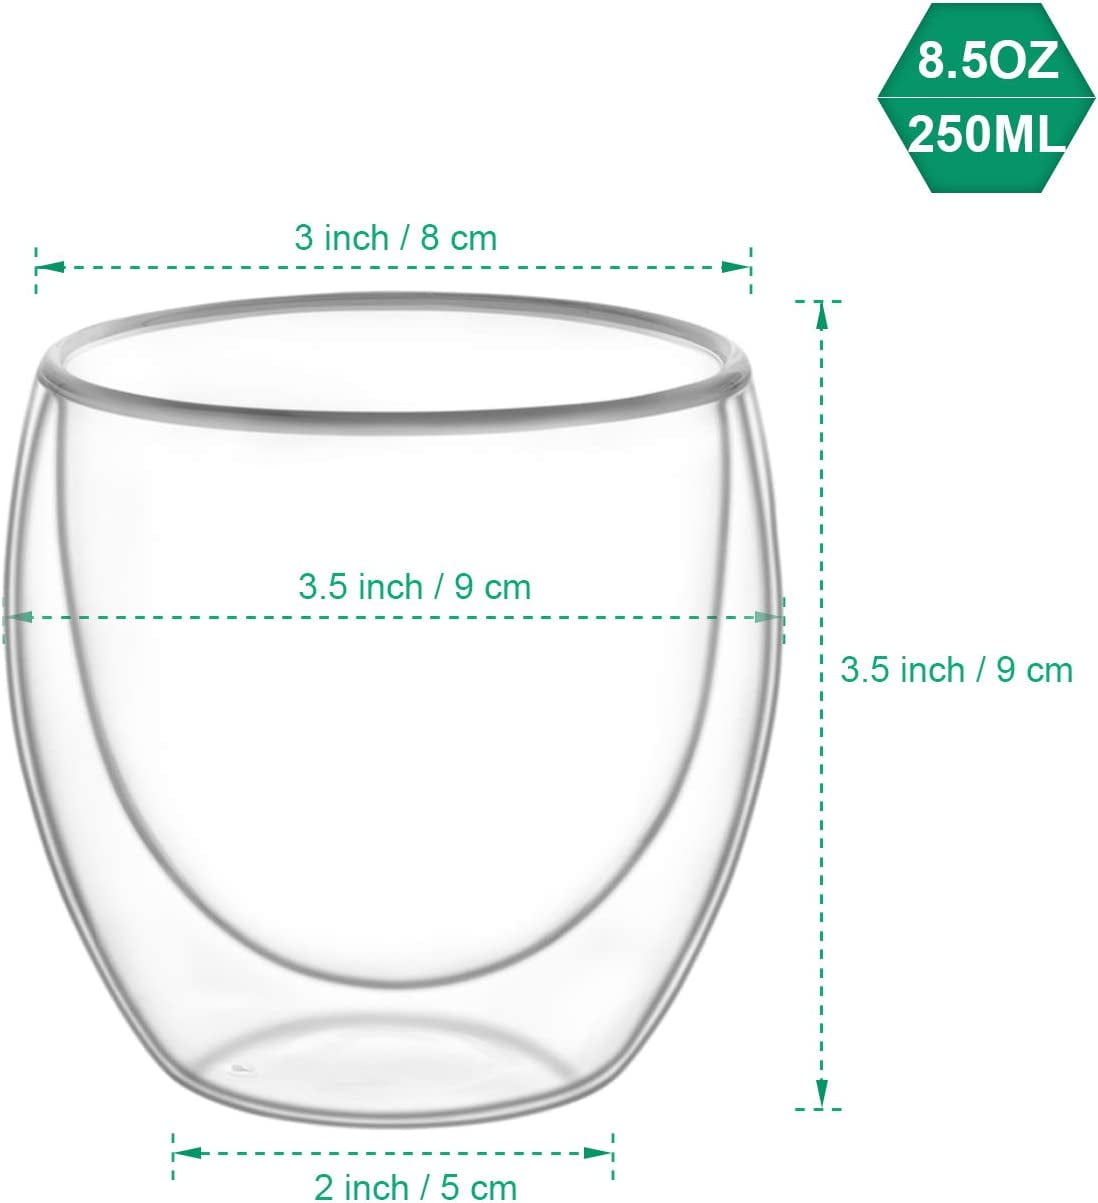 Aquach Double Wall Glass Espresso Coffee Cup 8 oz. 2pcs, Clear Drinking  Glasses Insulated, Single Wall Mouth/Double Wall Body